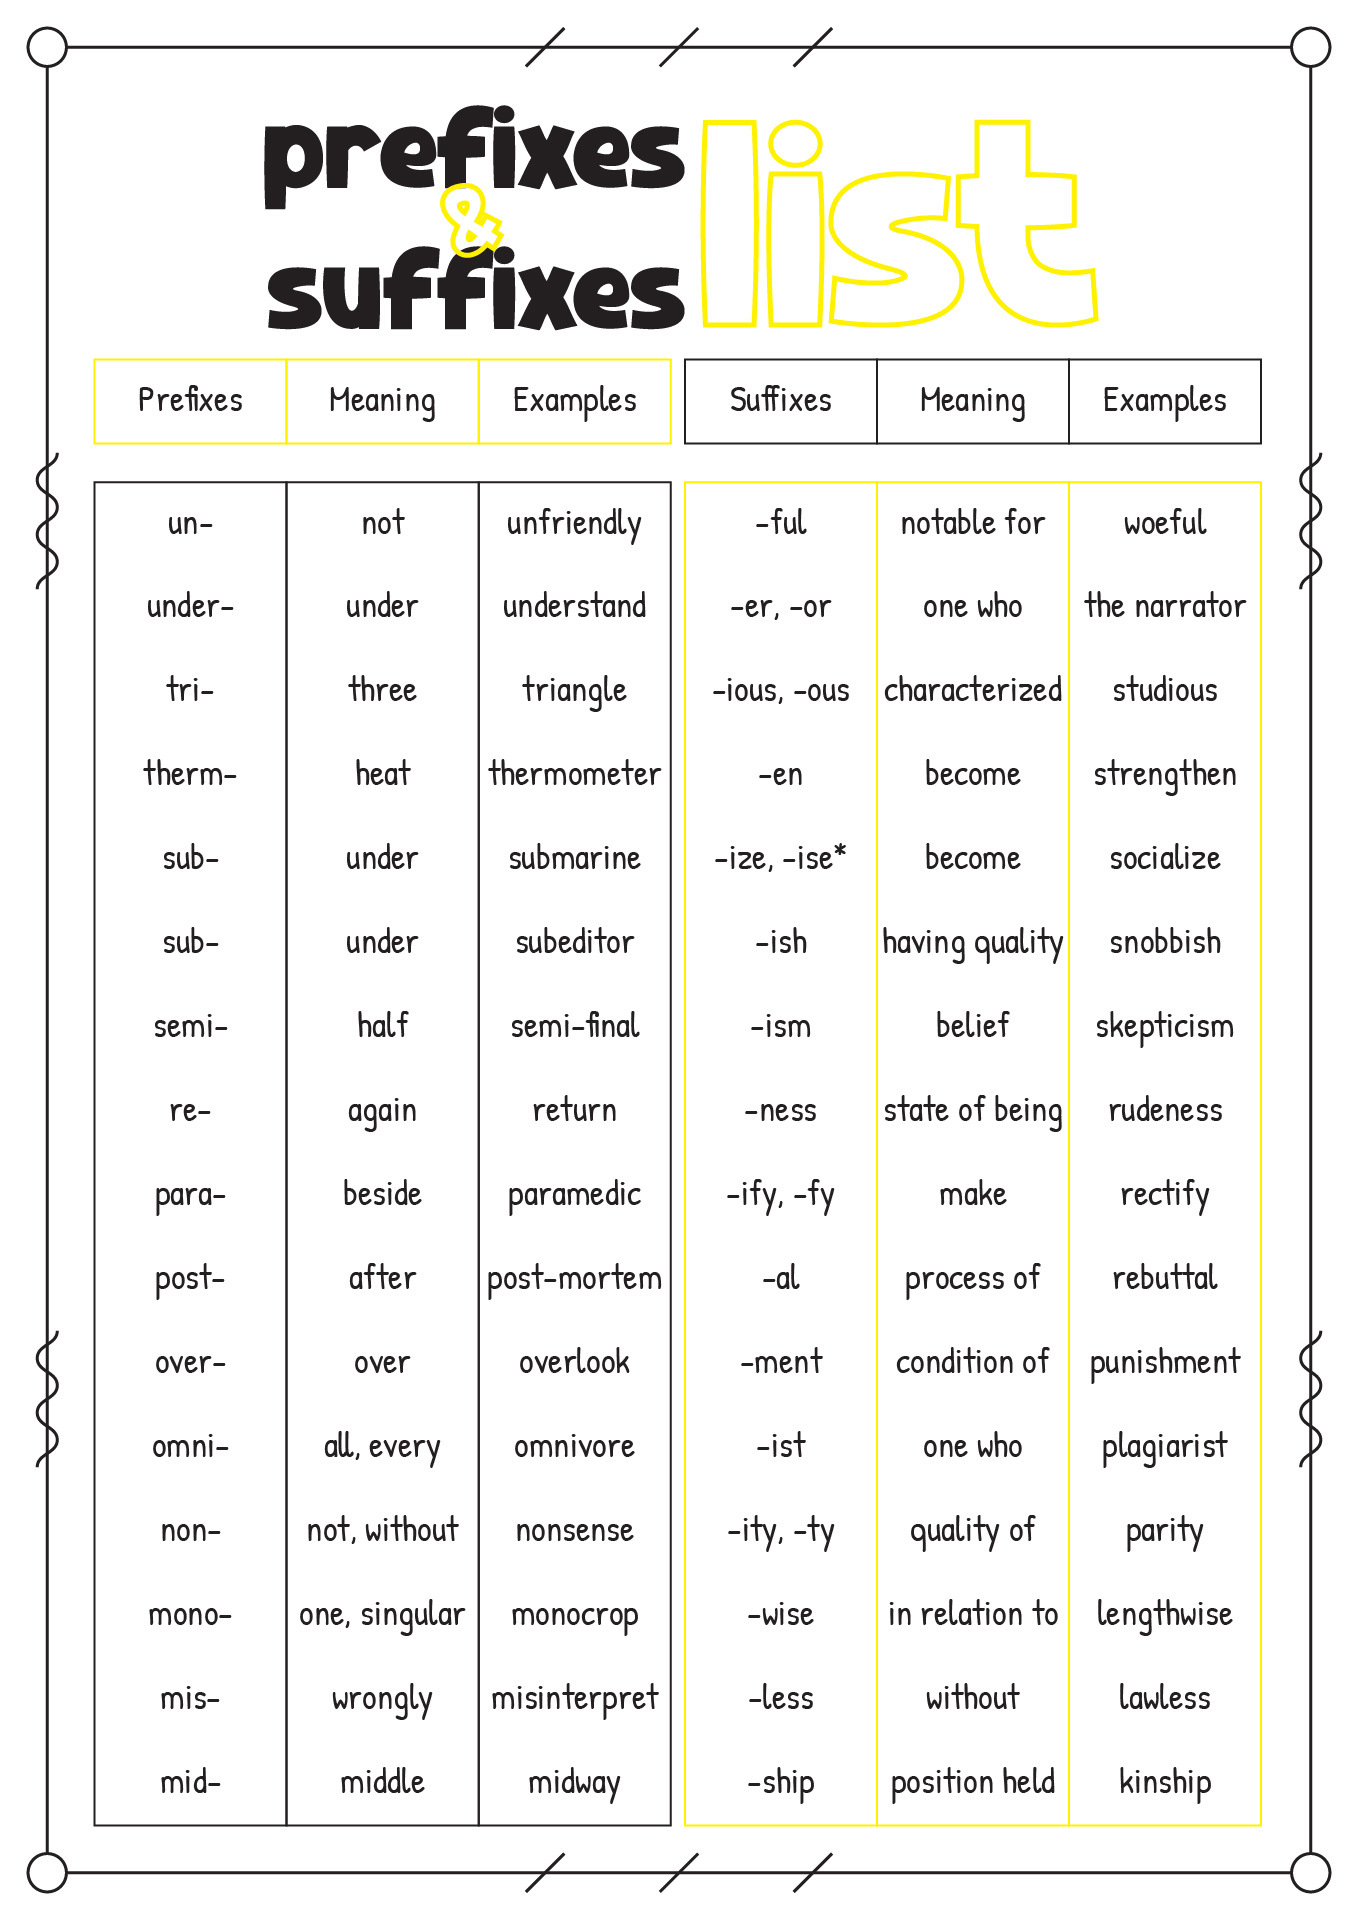 English Prefixes and Suffixes List